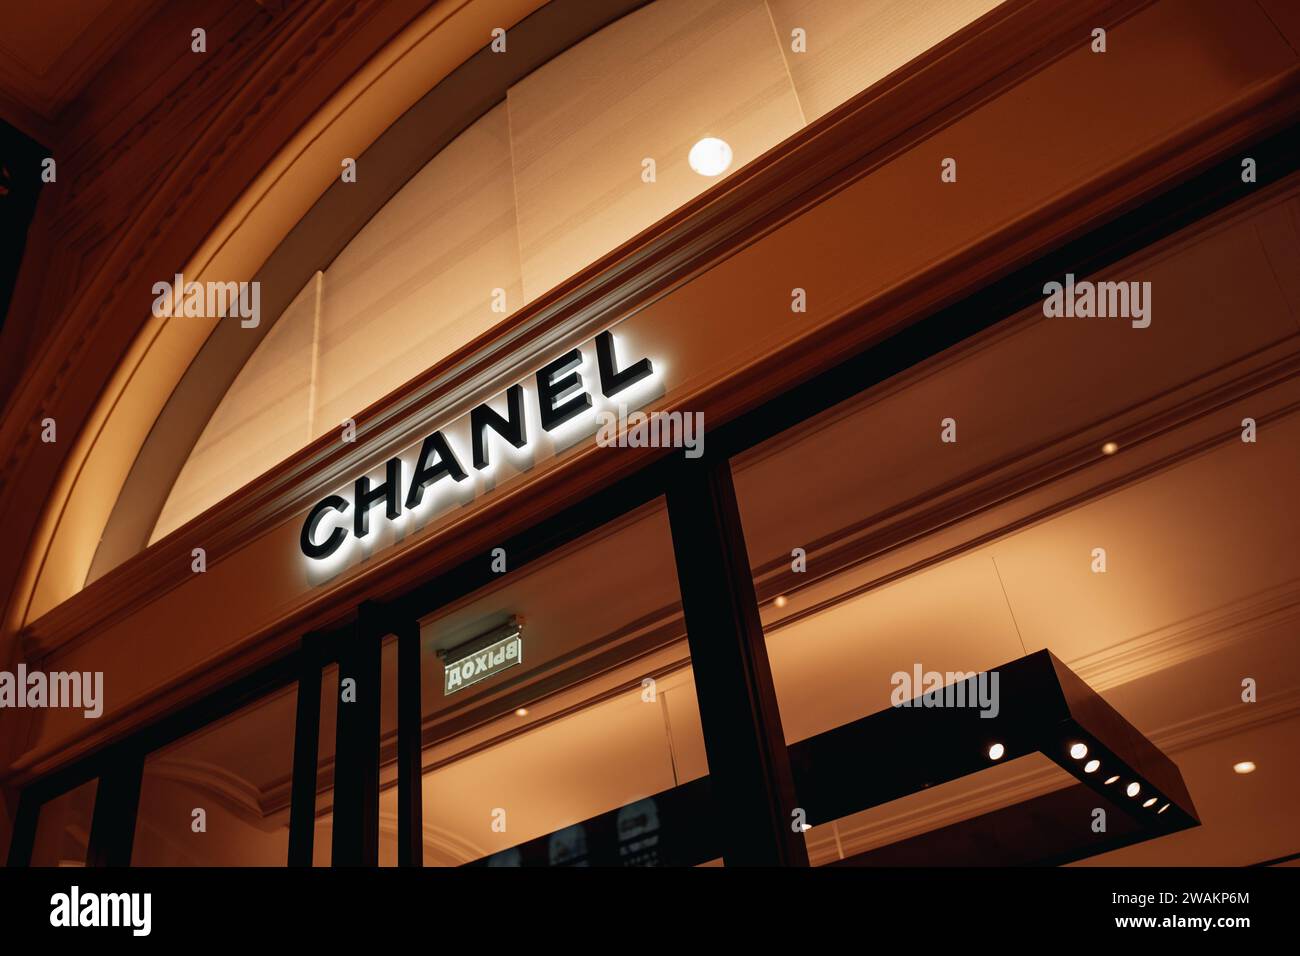 Chanel logotype. Classy luxury boutique showcase. Chanel is a fashion house founded in 1909 specialized in haute couture goods. Stock Photo